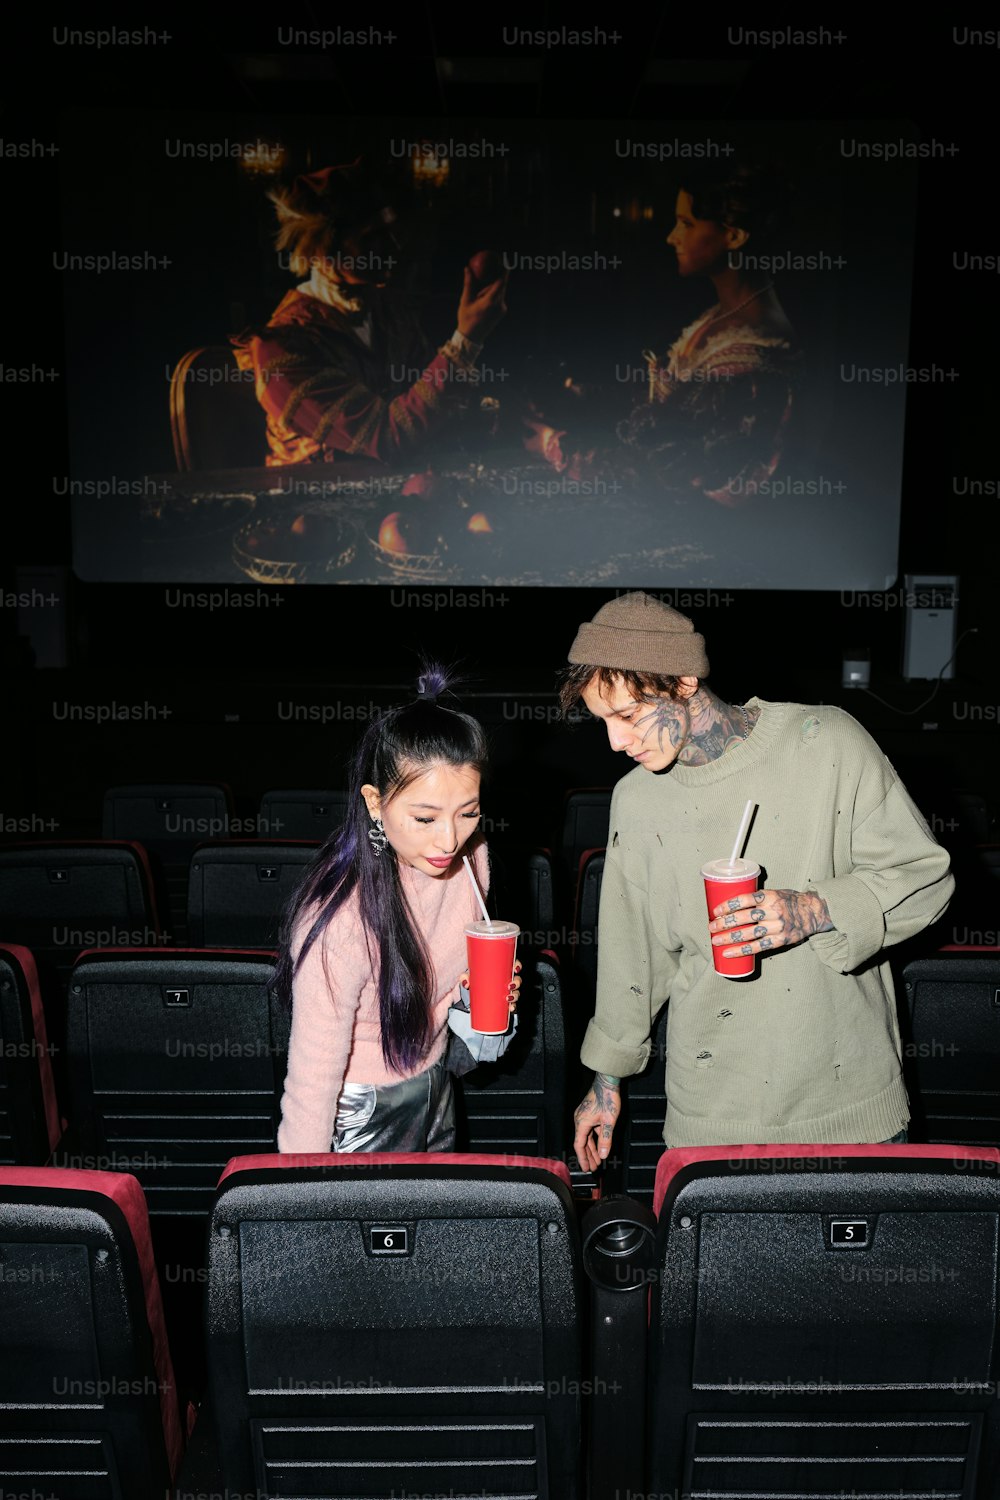 a man standing next to a woman holding a cup